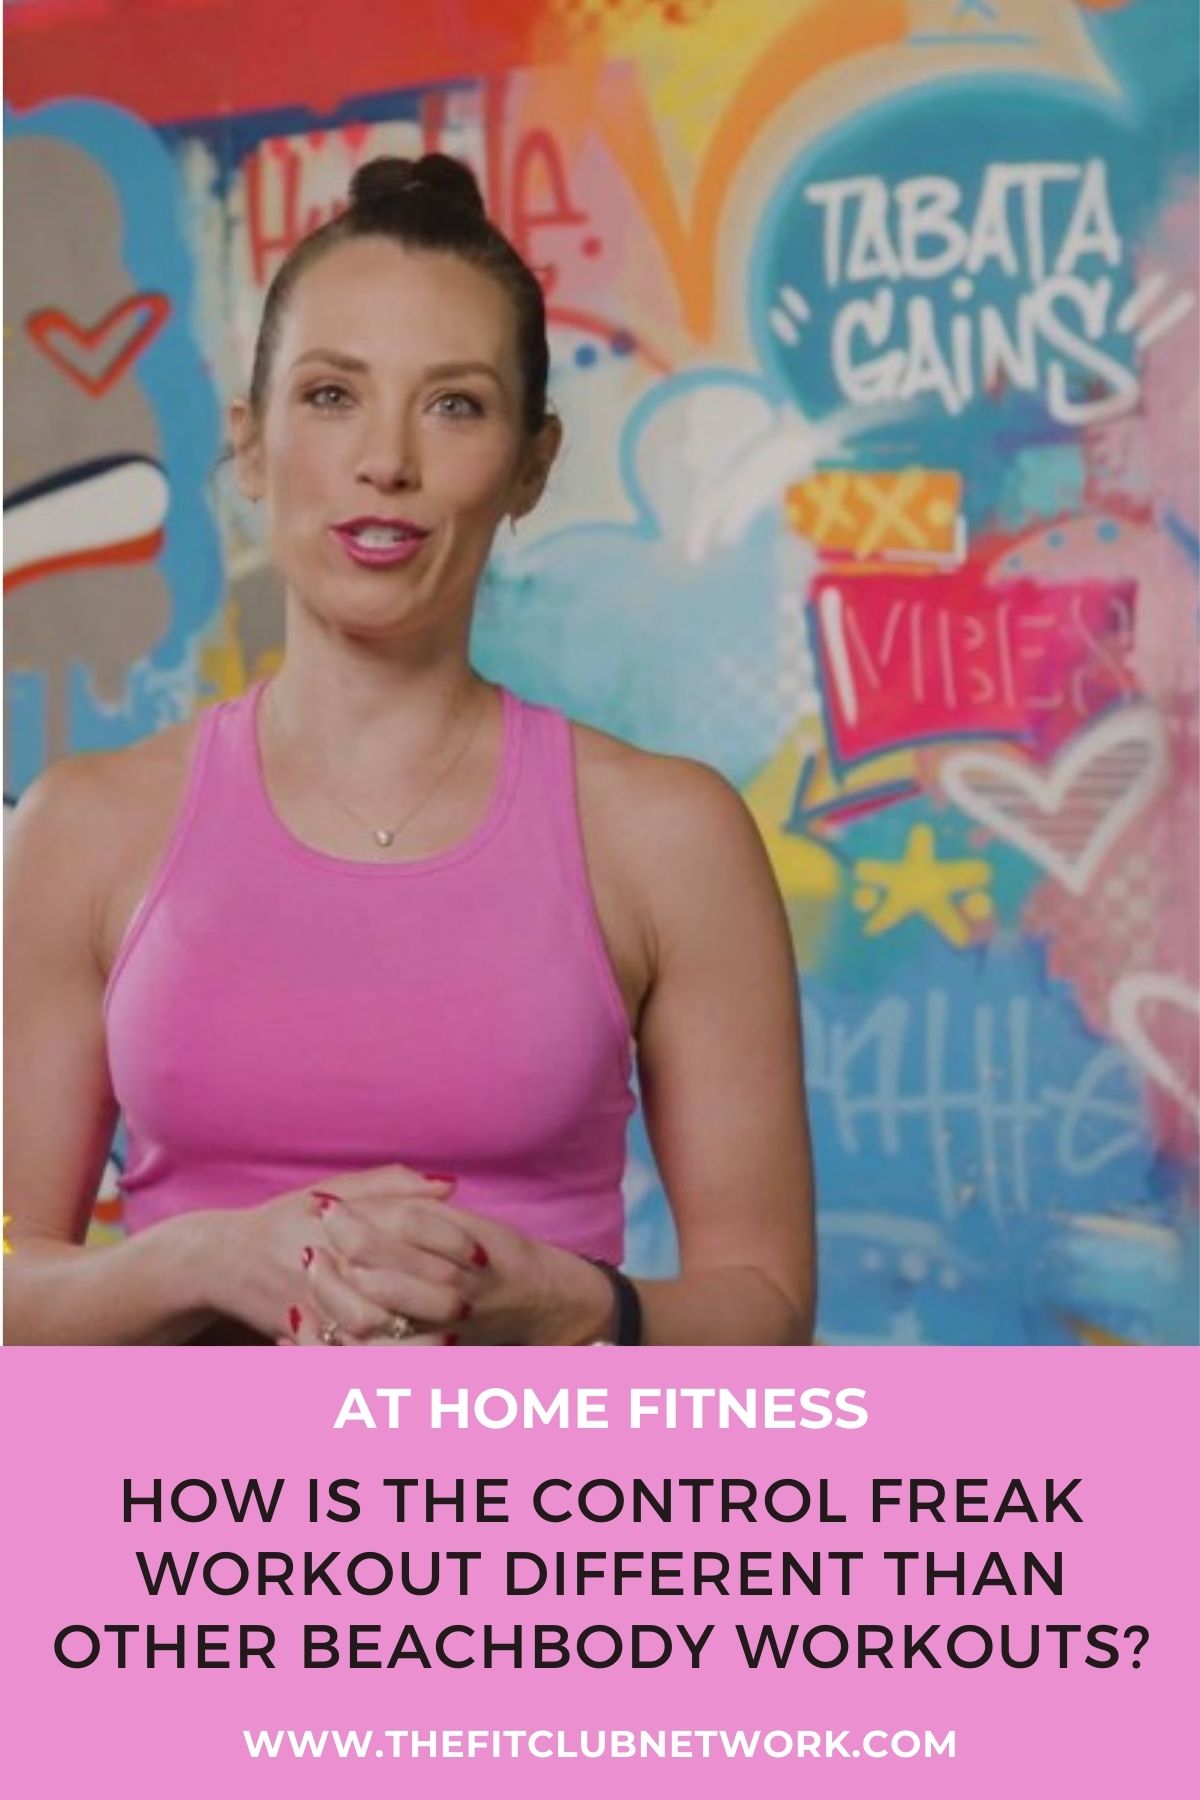 How Is the Control Freak Workout Different Than Other Beachbody Workouts?